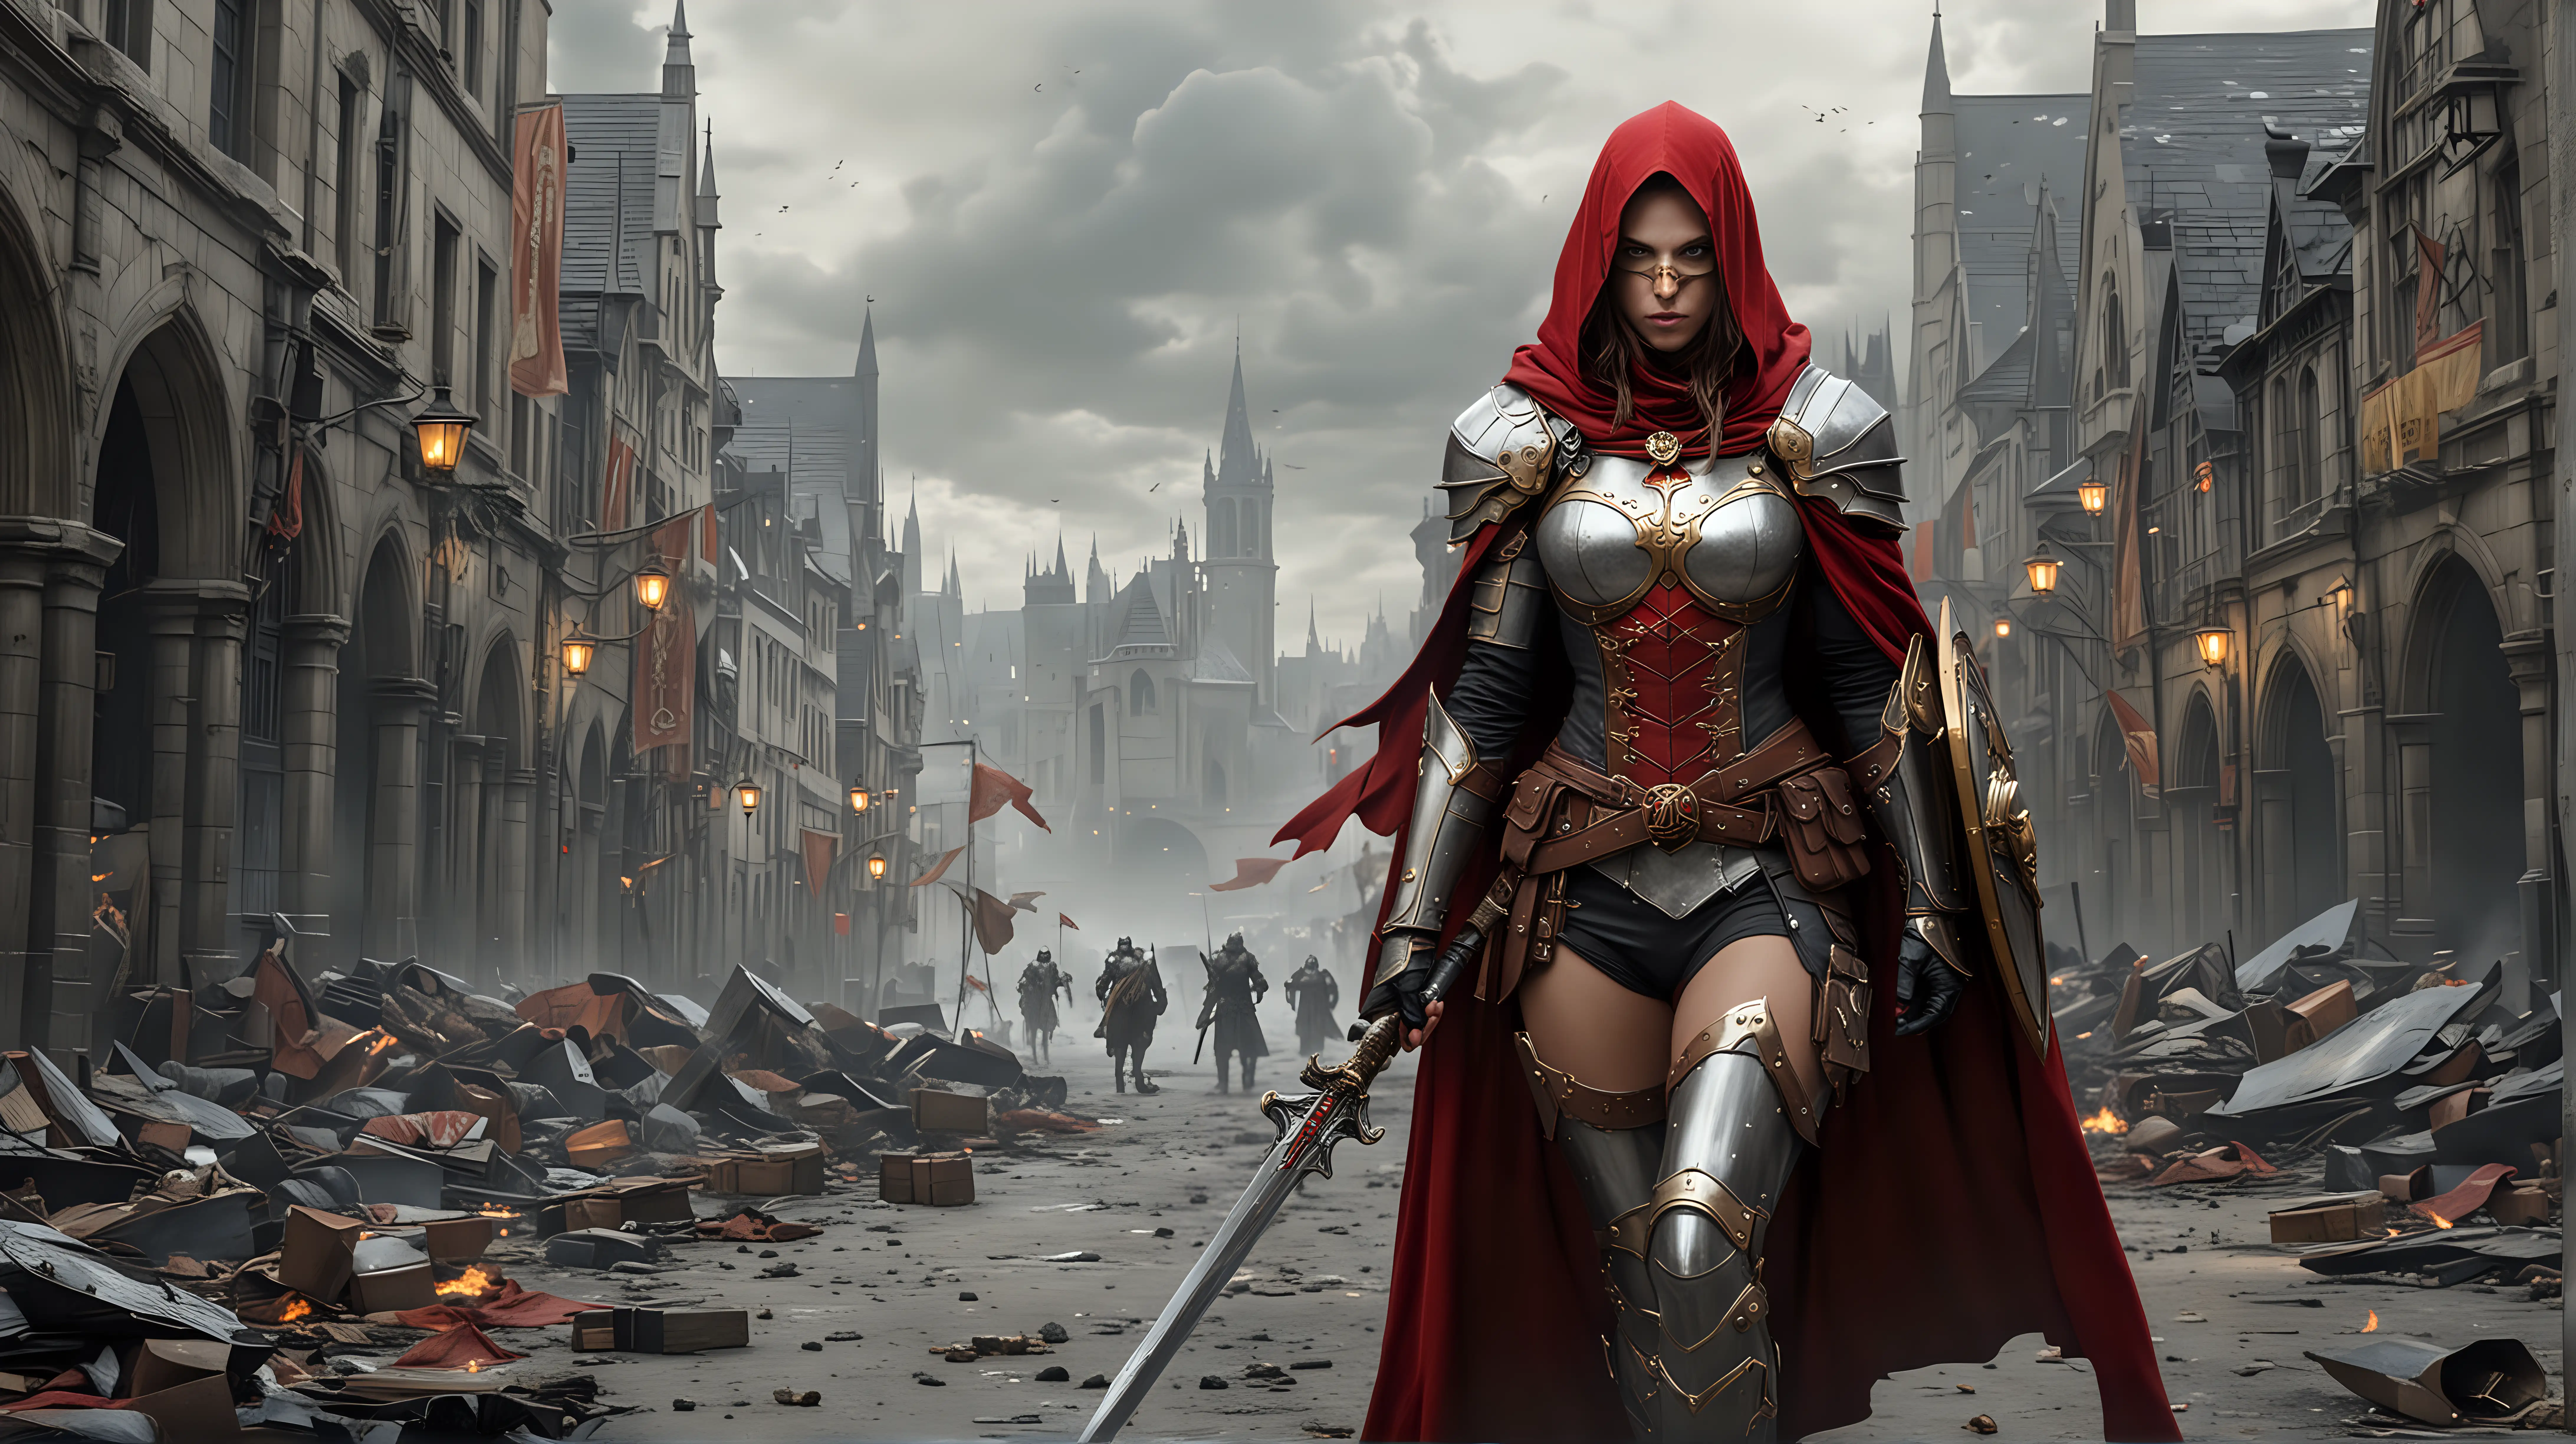 inquisitor , knight, woman, epic fantasy, red hood, cloak, large shield, knight mask, white, banner from shoulder, gold armour trim, angry look, weapons drawn, heavily armoured. city back drop